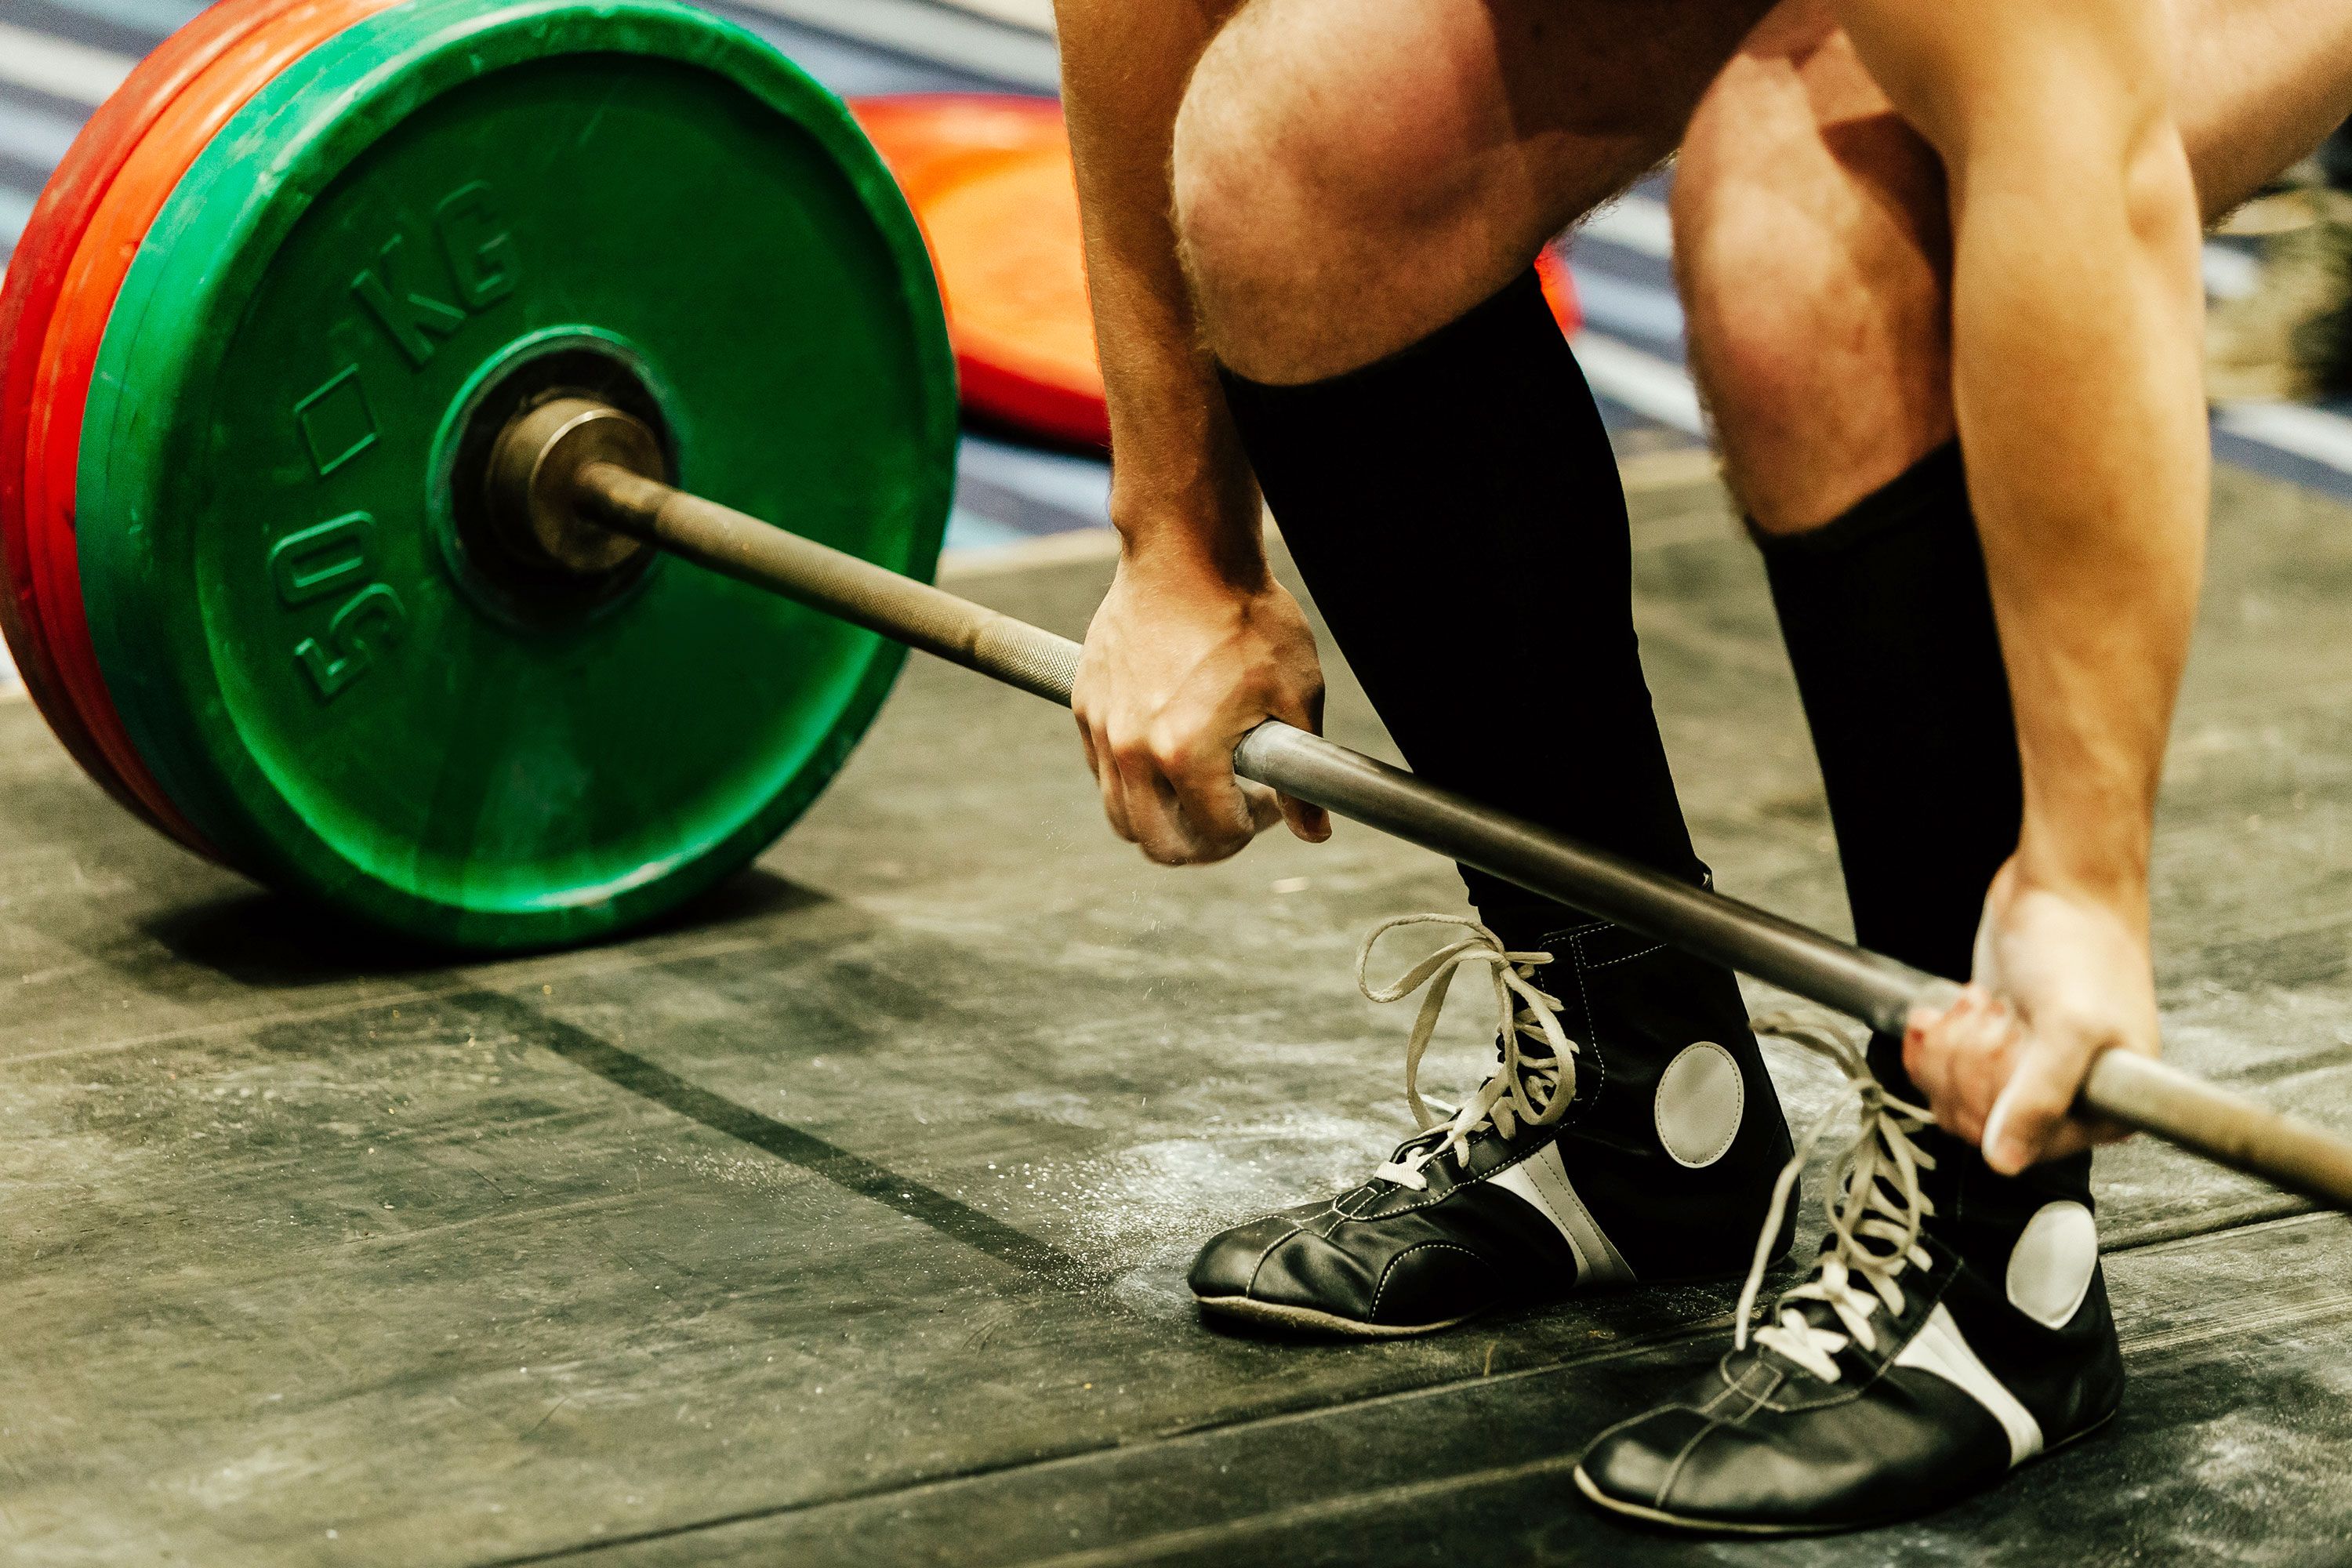 How to Watch the 2019 World Open Powerlifting Championships